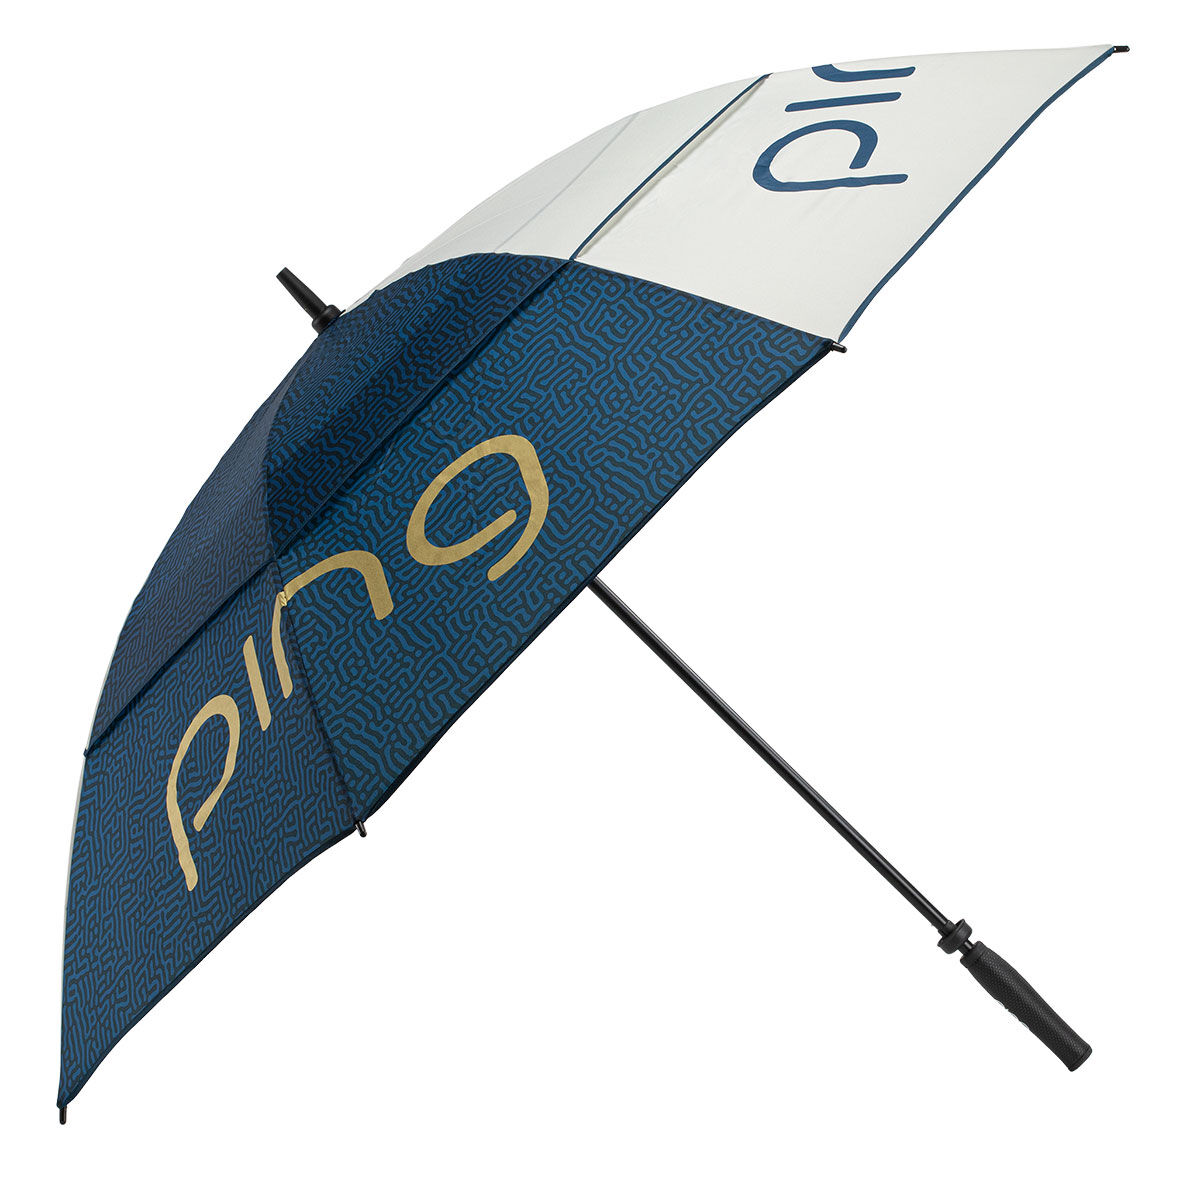 PING Womens Double Canopy Golf Umbrella, Female, Navy/gold, 62 inches | American Golf von Ping